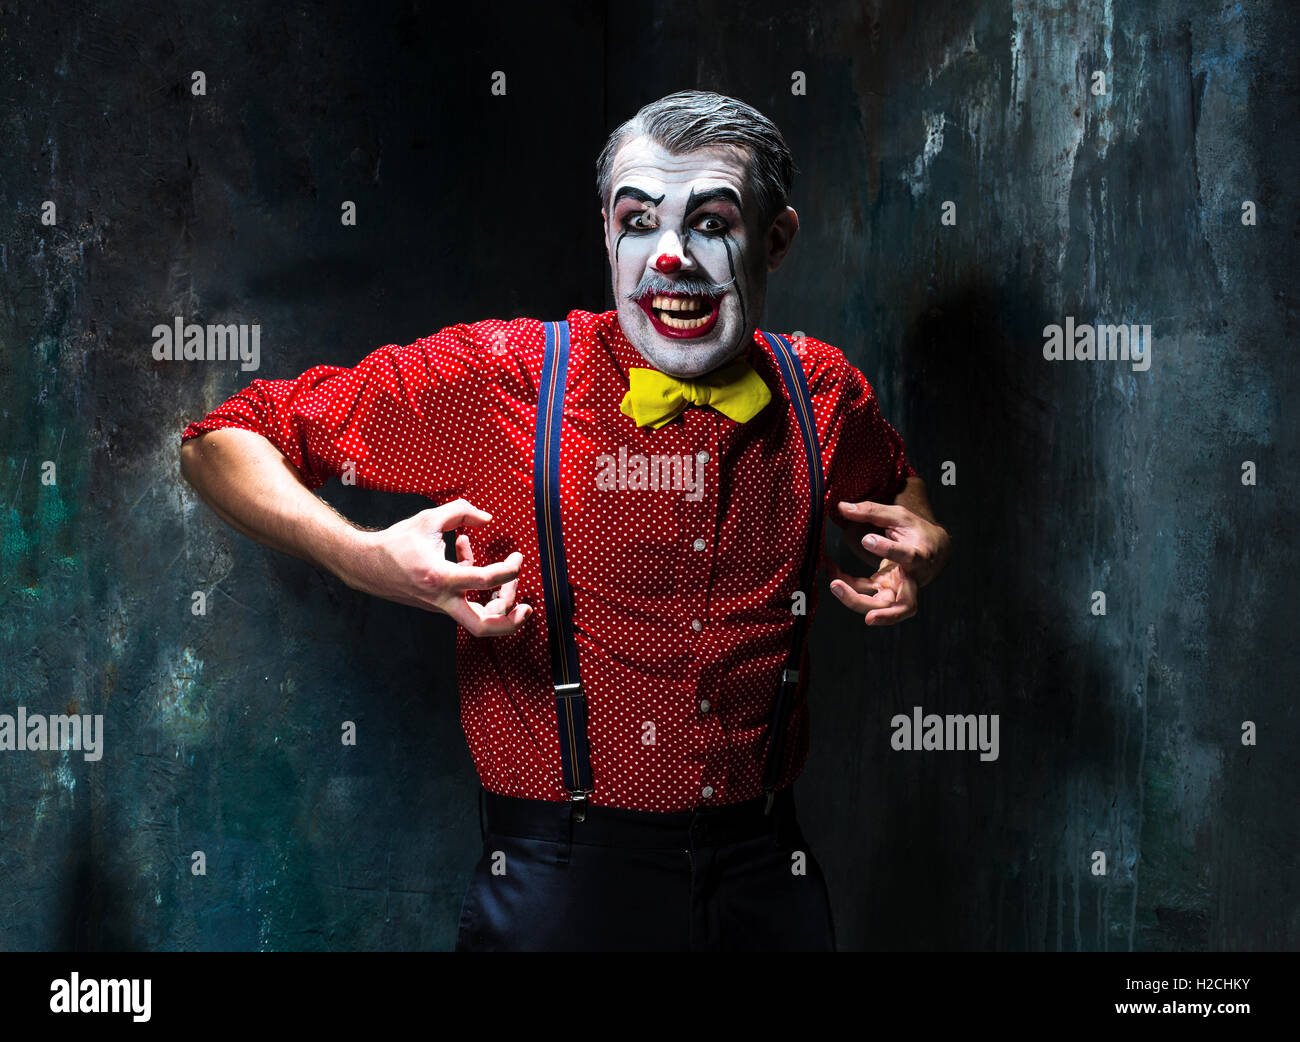 Terrible clown and Halloween theme: Crazy red clown in a shirt with suspenders Stock Photo